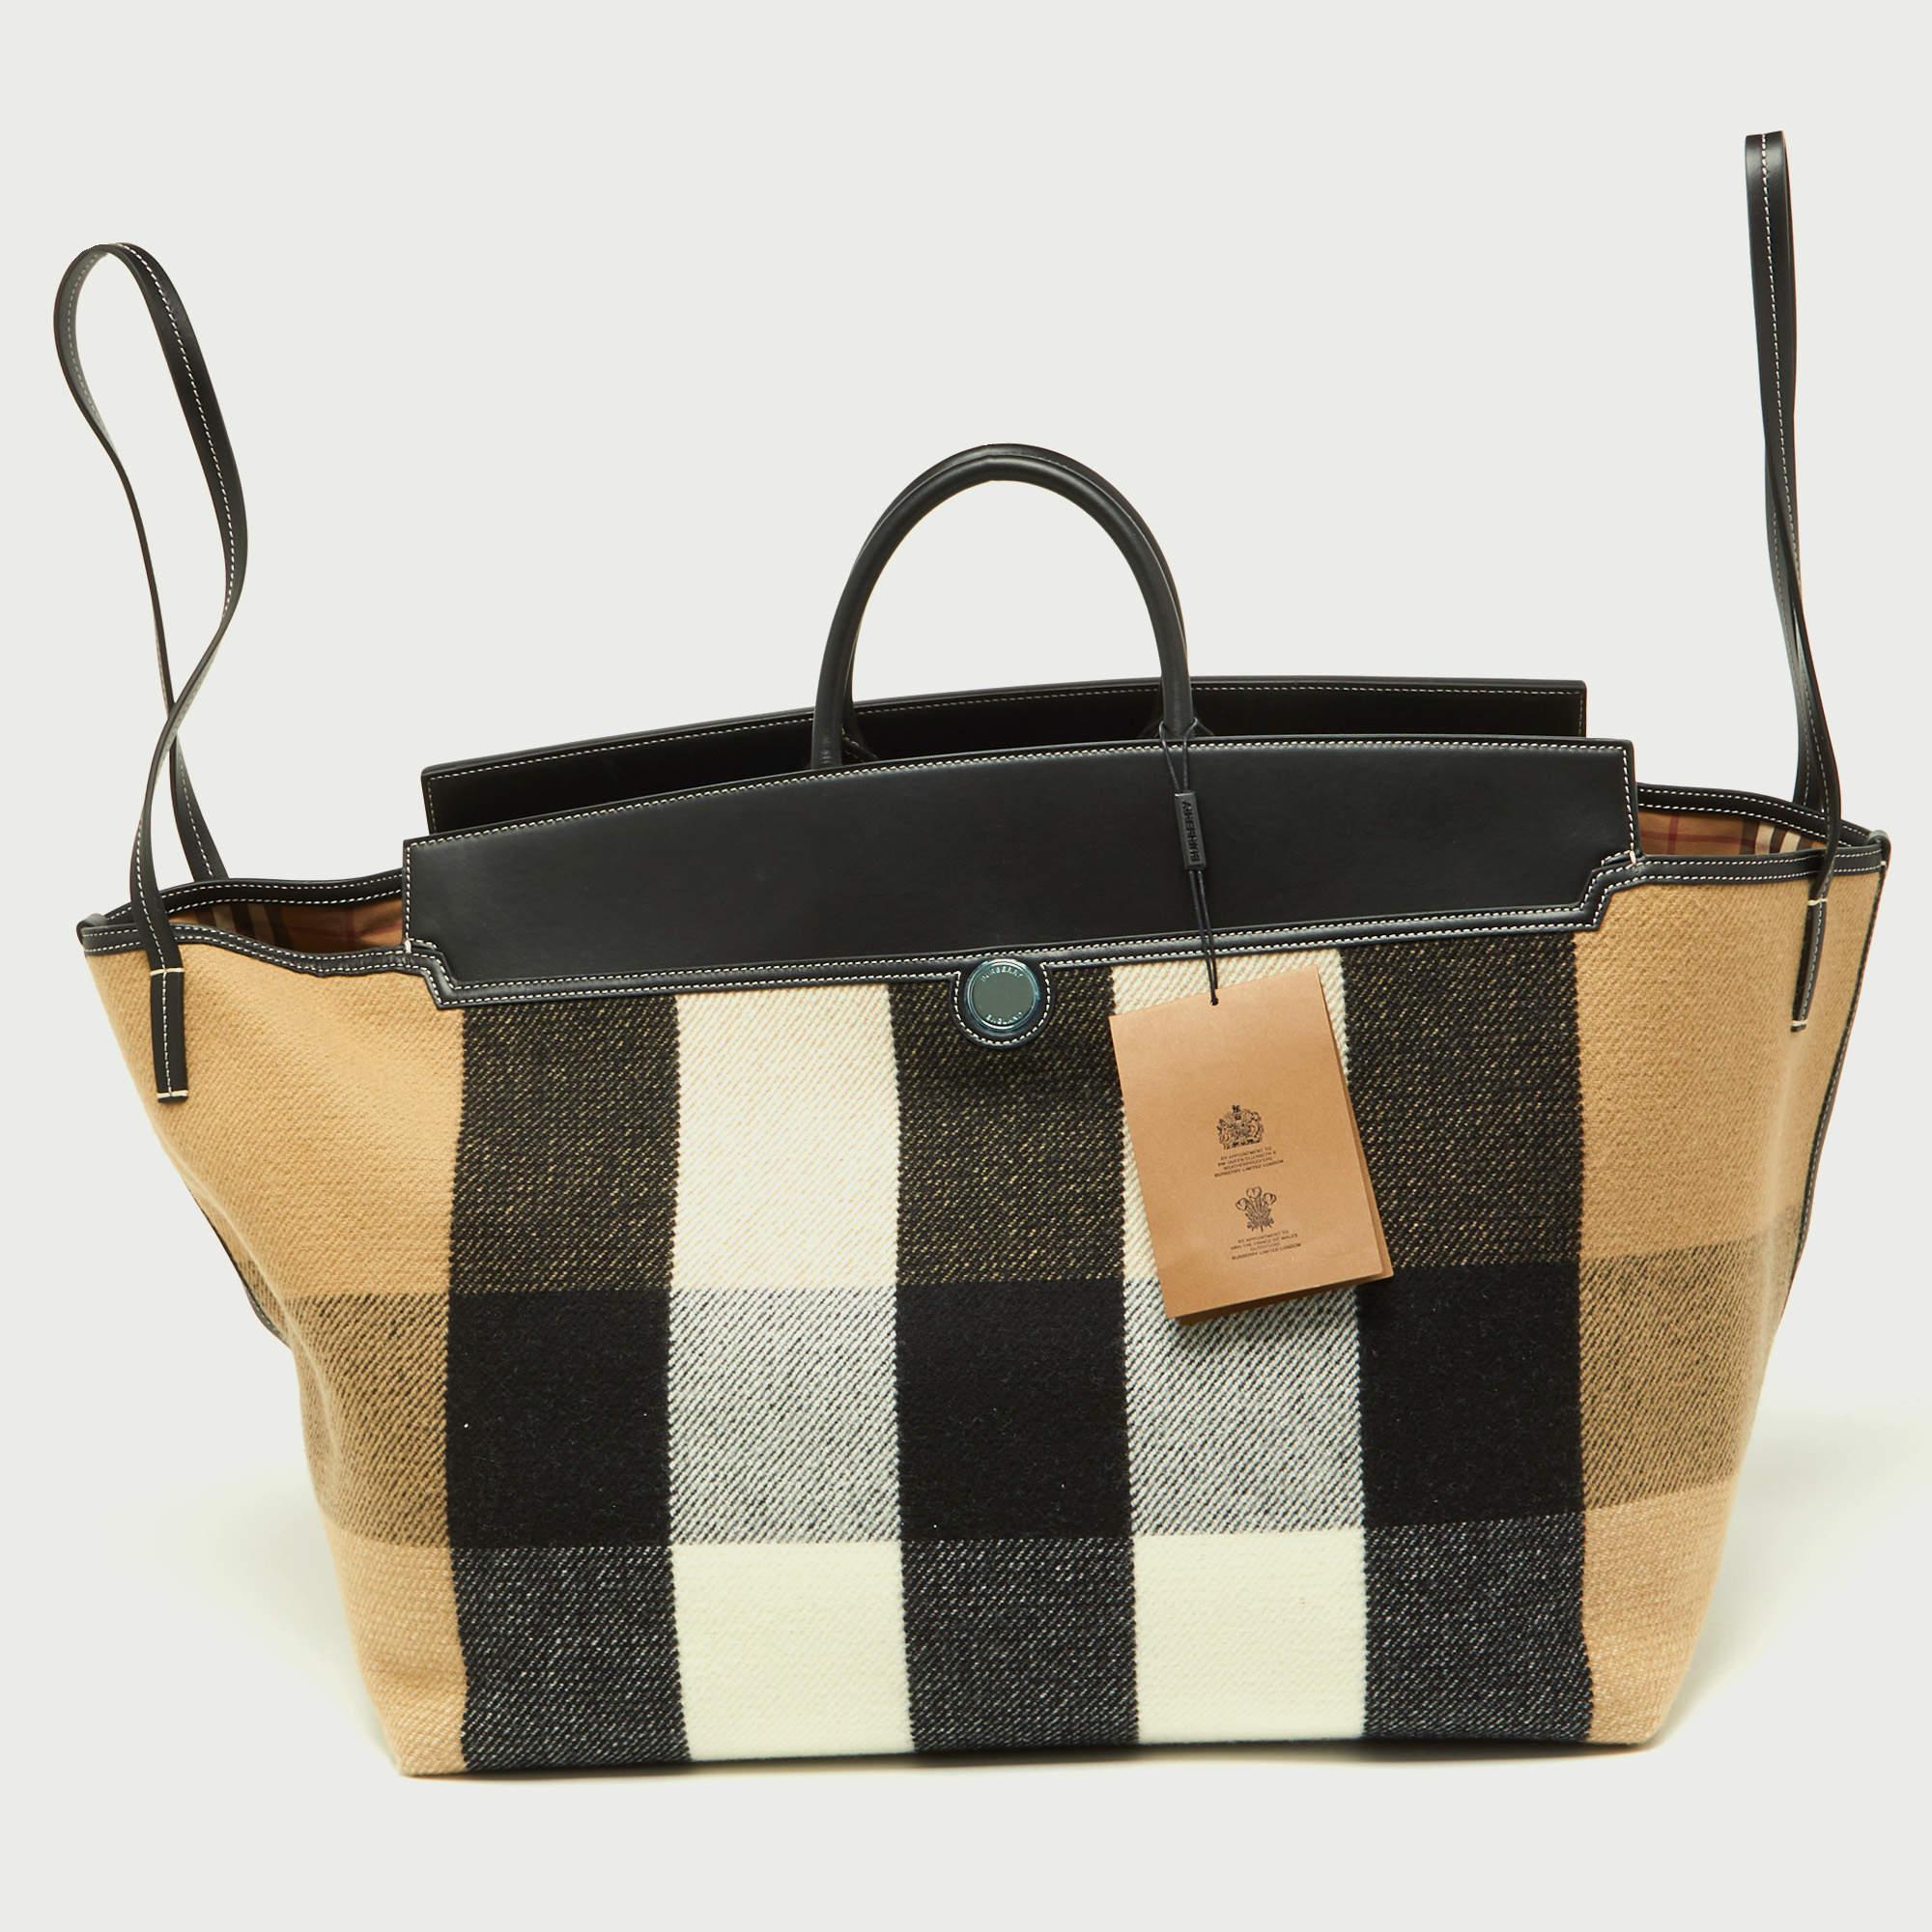 The Burberry Society Holdall Tote exudes timeless elegance. Crafted from high-quality wool and leather, its spacious interior accommodates essentials effortlessly. The iconic check pattern adds a sophisticated touch, making it a versatile and